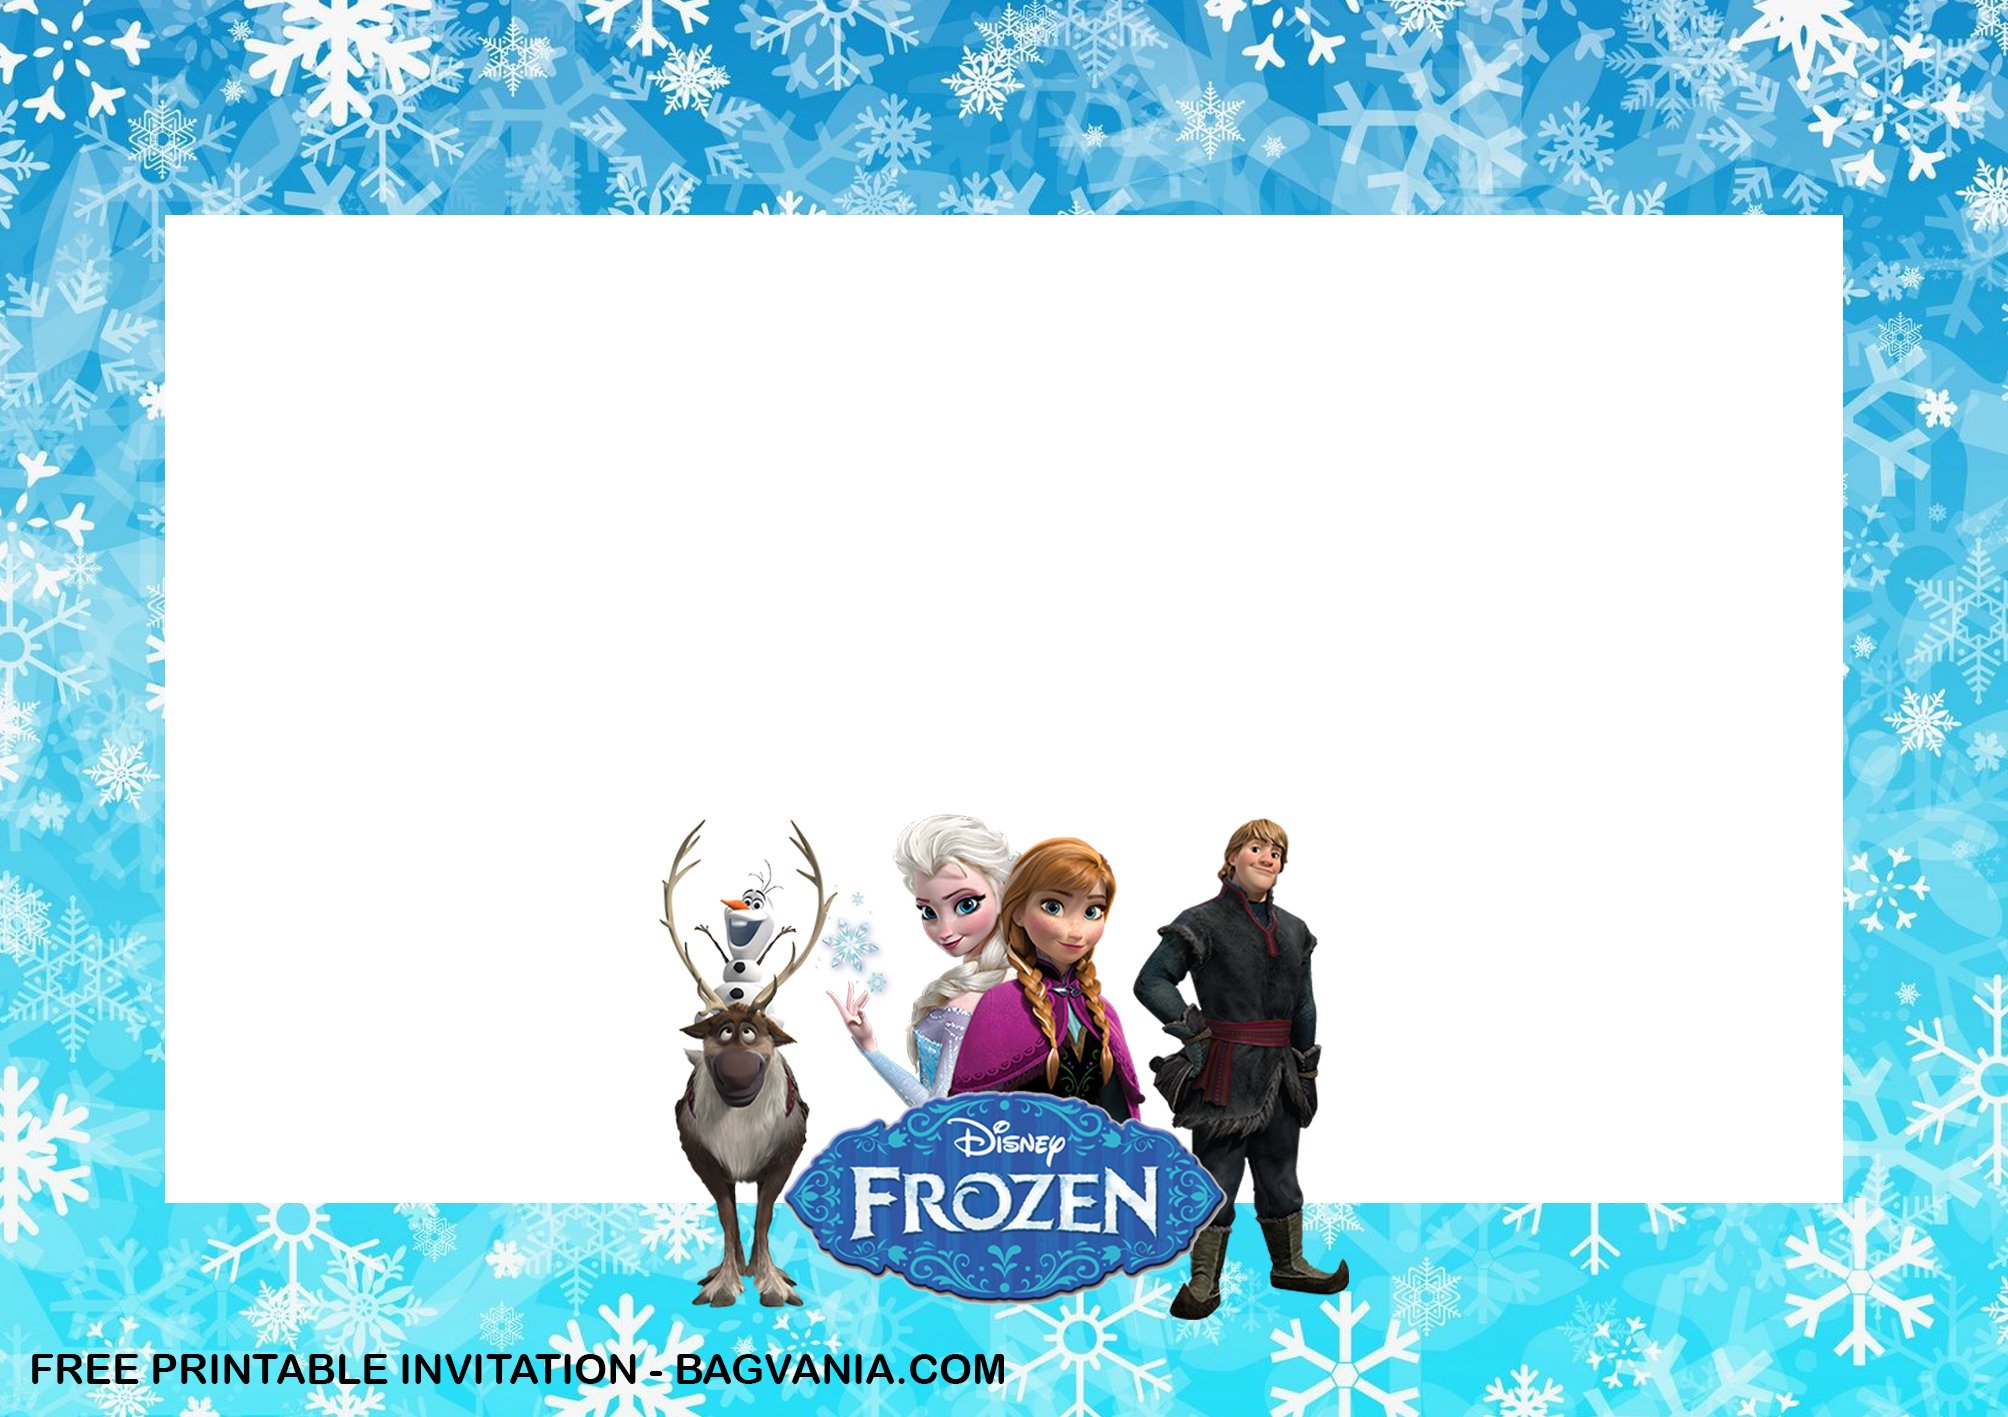 FREE Printable) – Anna and Elsa Frozen Birthday Invitation With Frozen Birthday Card Template